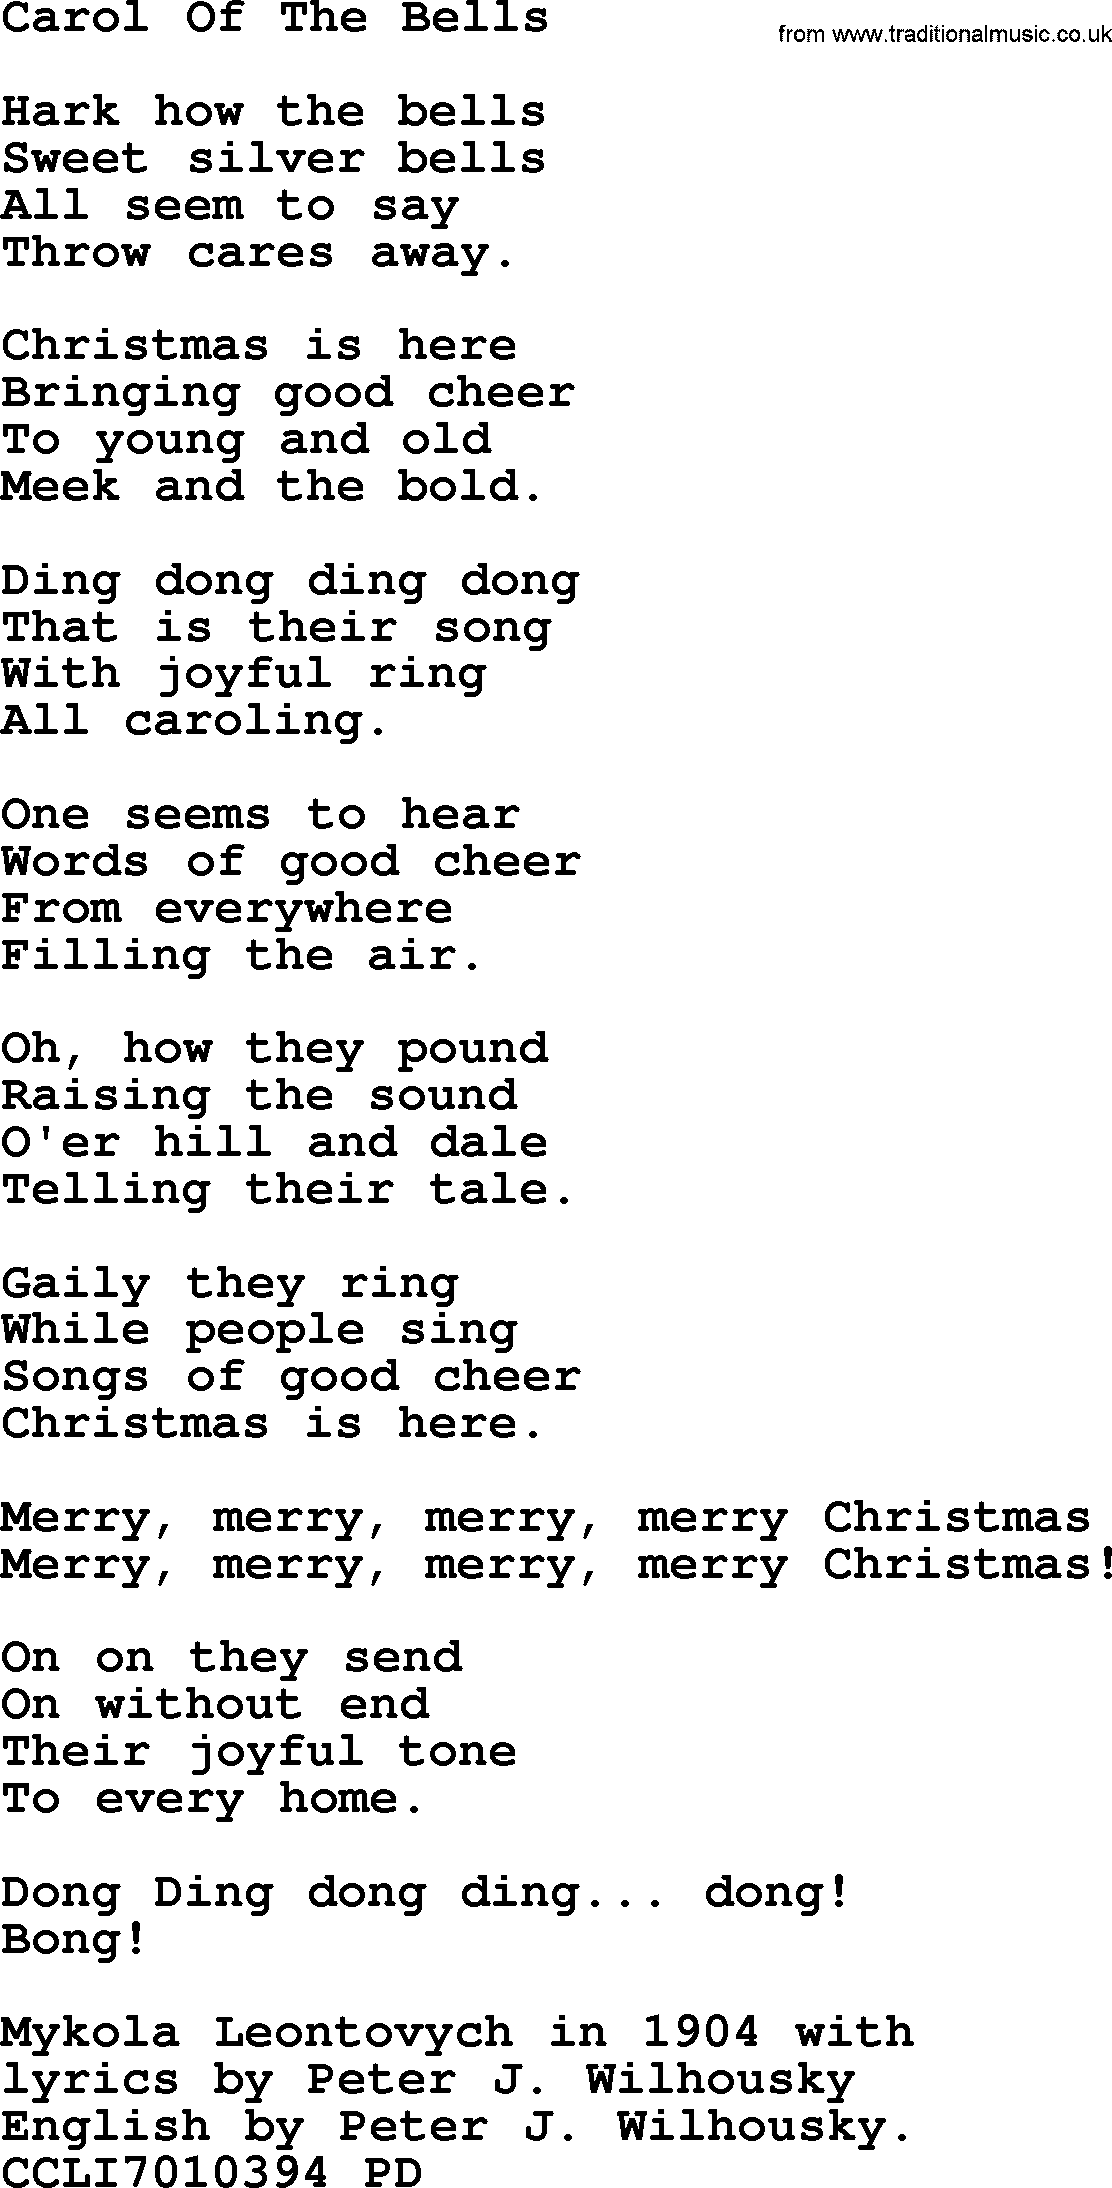 Christmas Powerpoints, Song Carol Of The Bells Lyrics, PPT(for